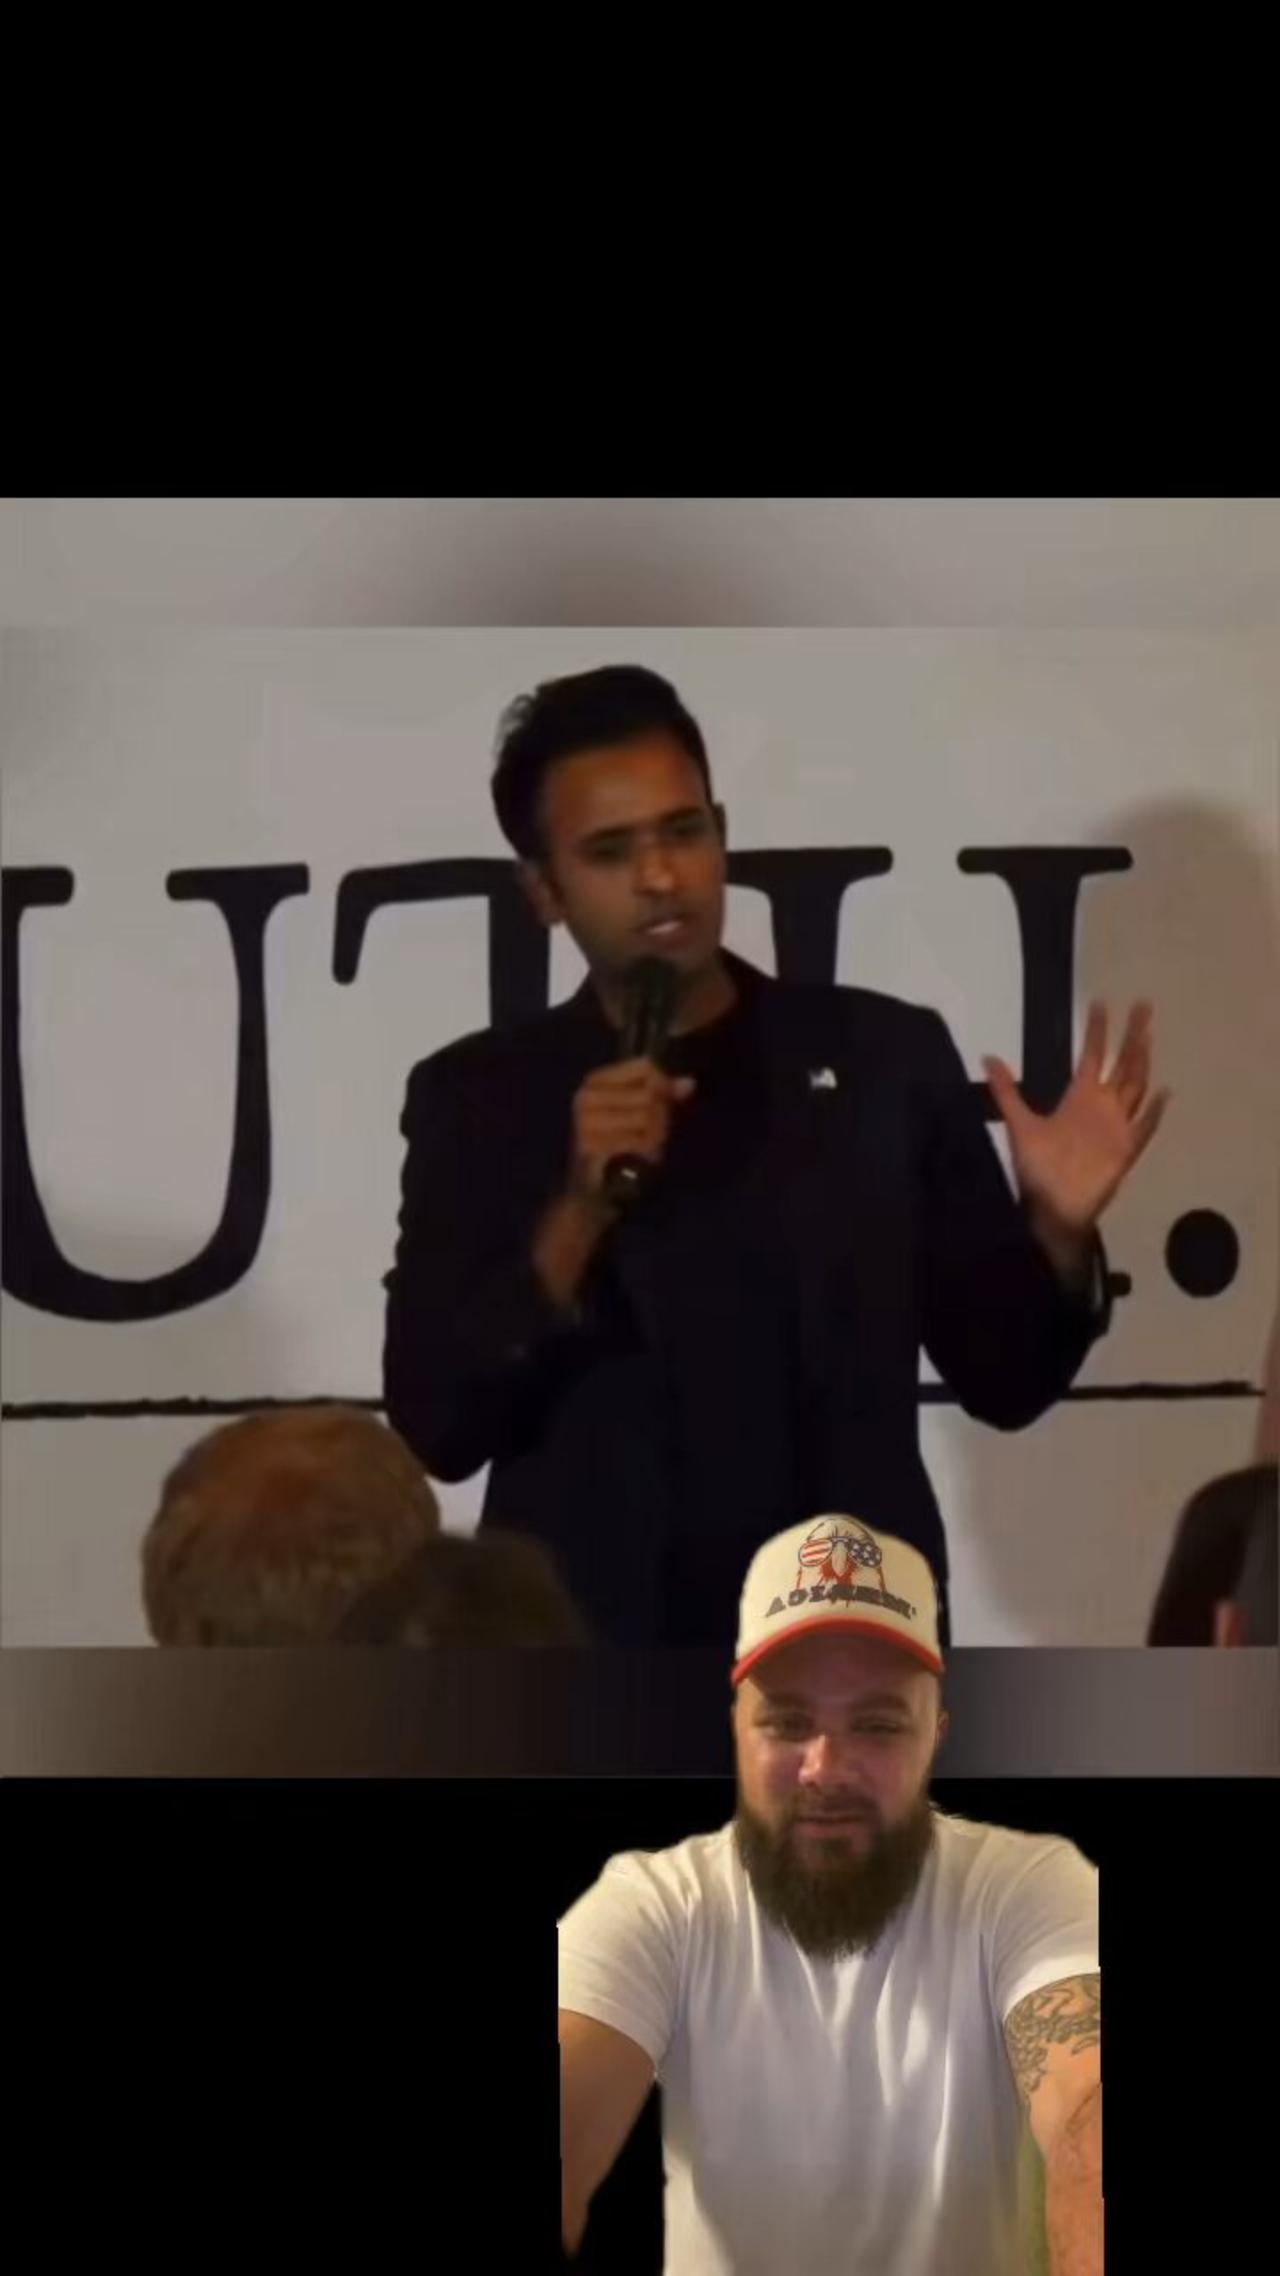 Presidential candidate Vivek Ramaswamy says he will release the Epstein “client list” if elected